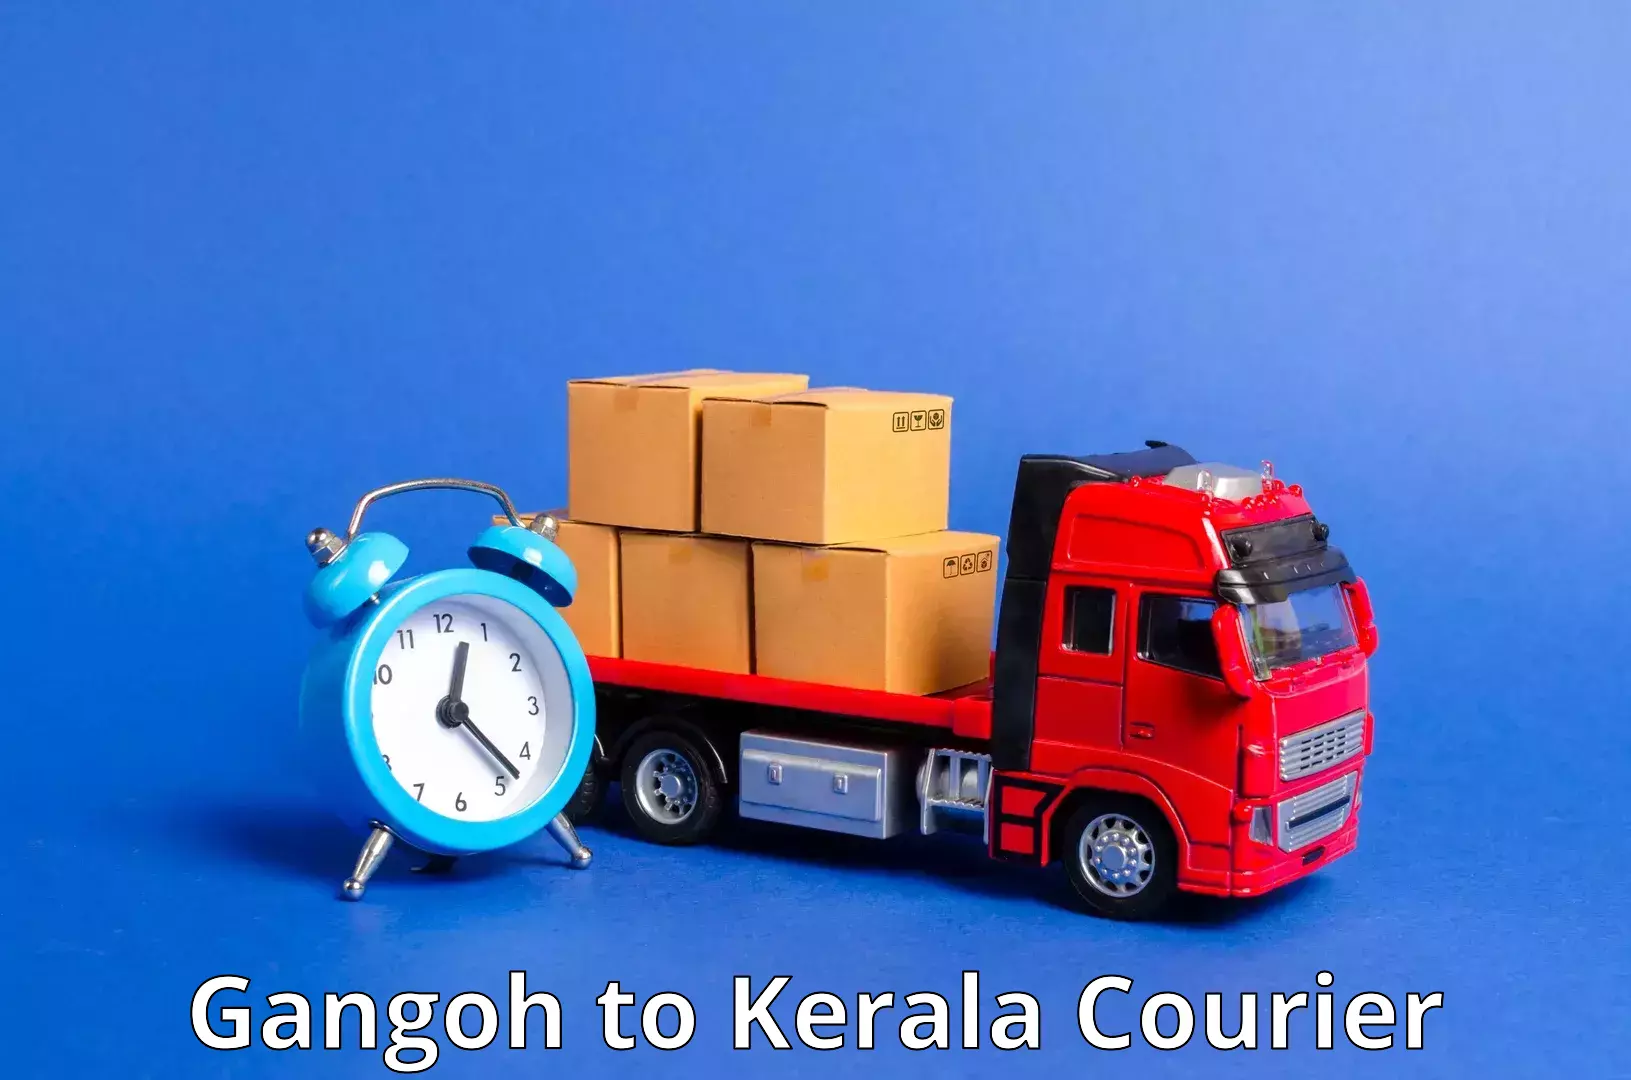 Express mail service Gangoh to Cochin University of Science and Technology